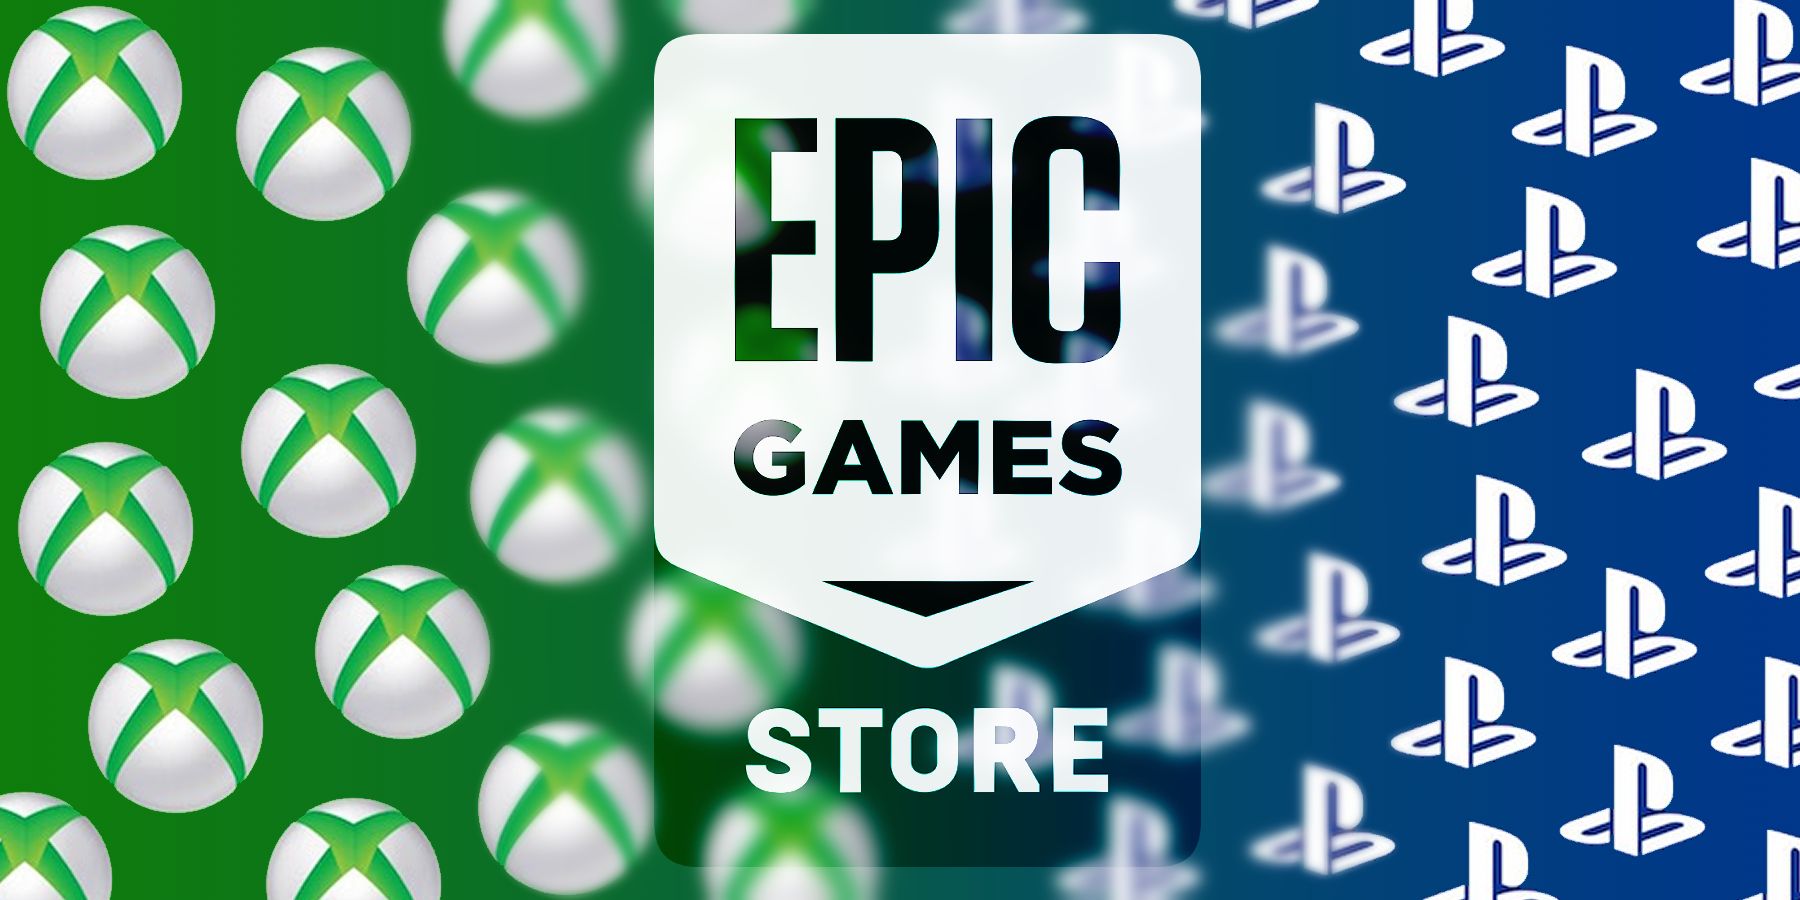 epic-games-store-feature-image-xbox-logo-ps-logo